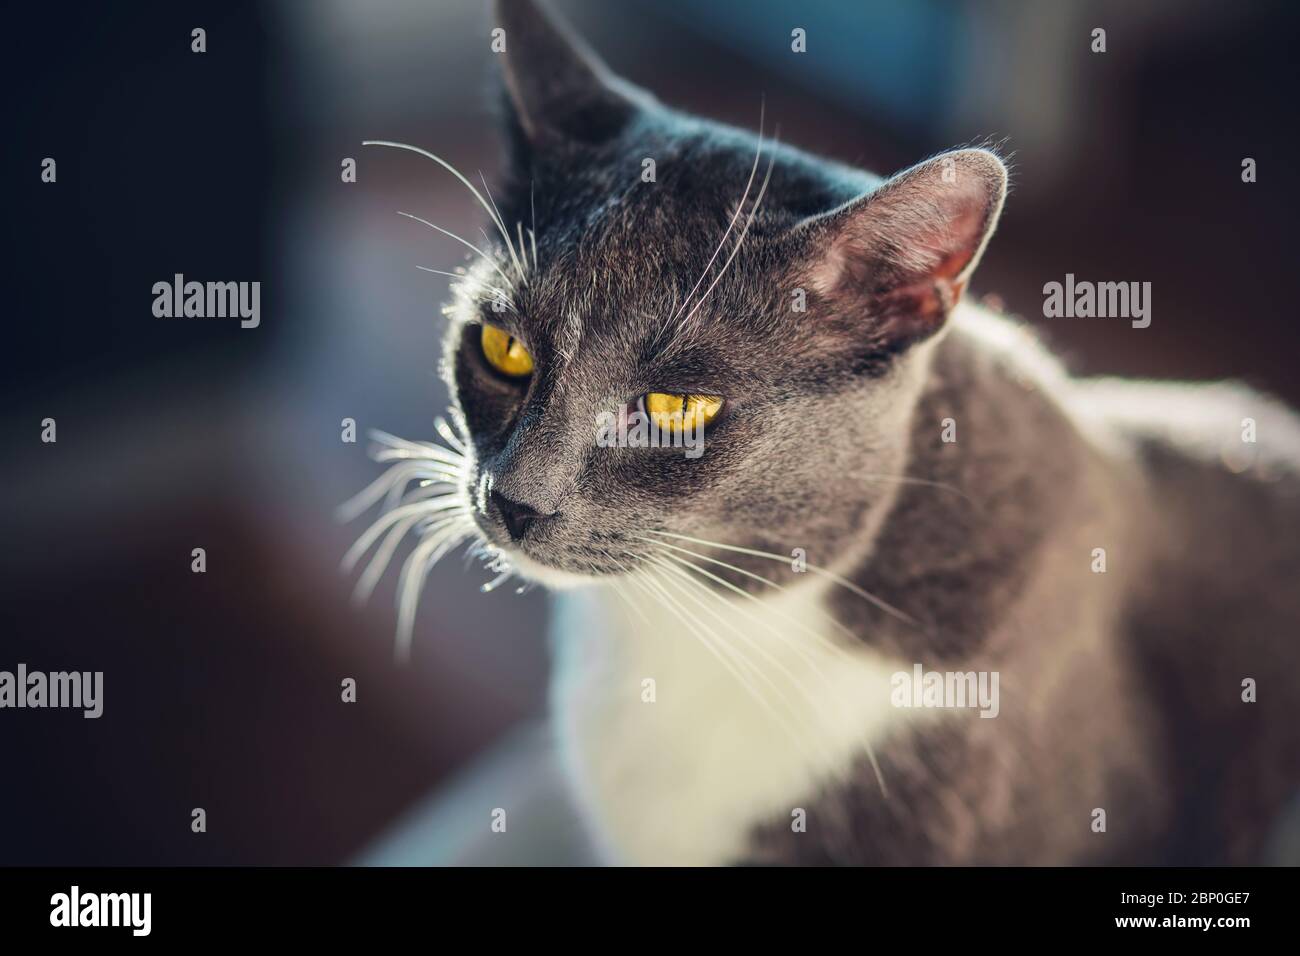 A cute domestic gray cat with yellow eyes and a white spot on its forehead sits in the bright warm light of the sun. Stock Photo